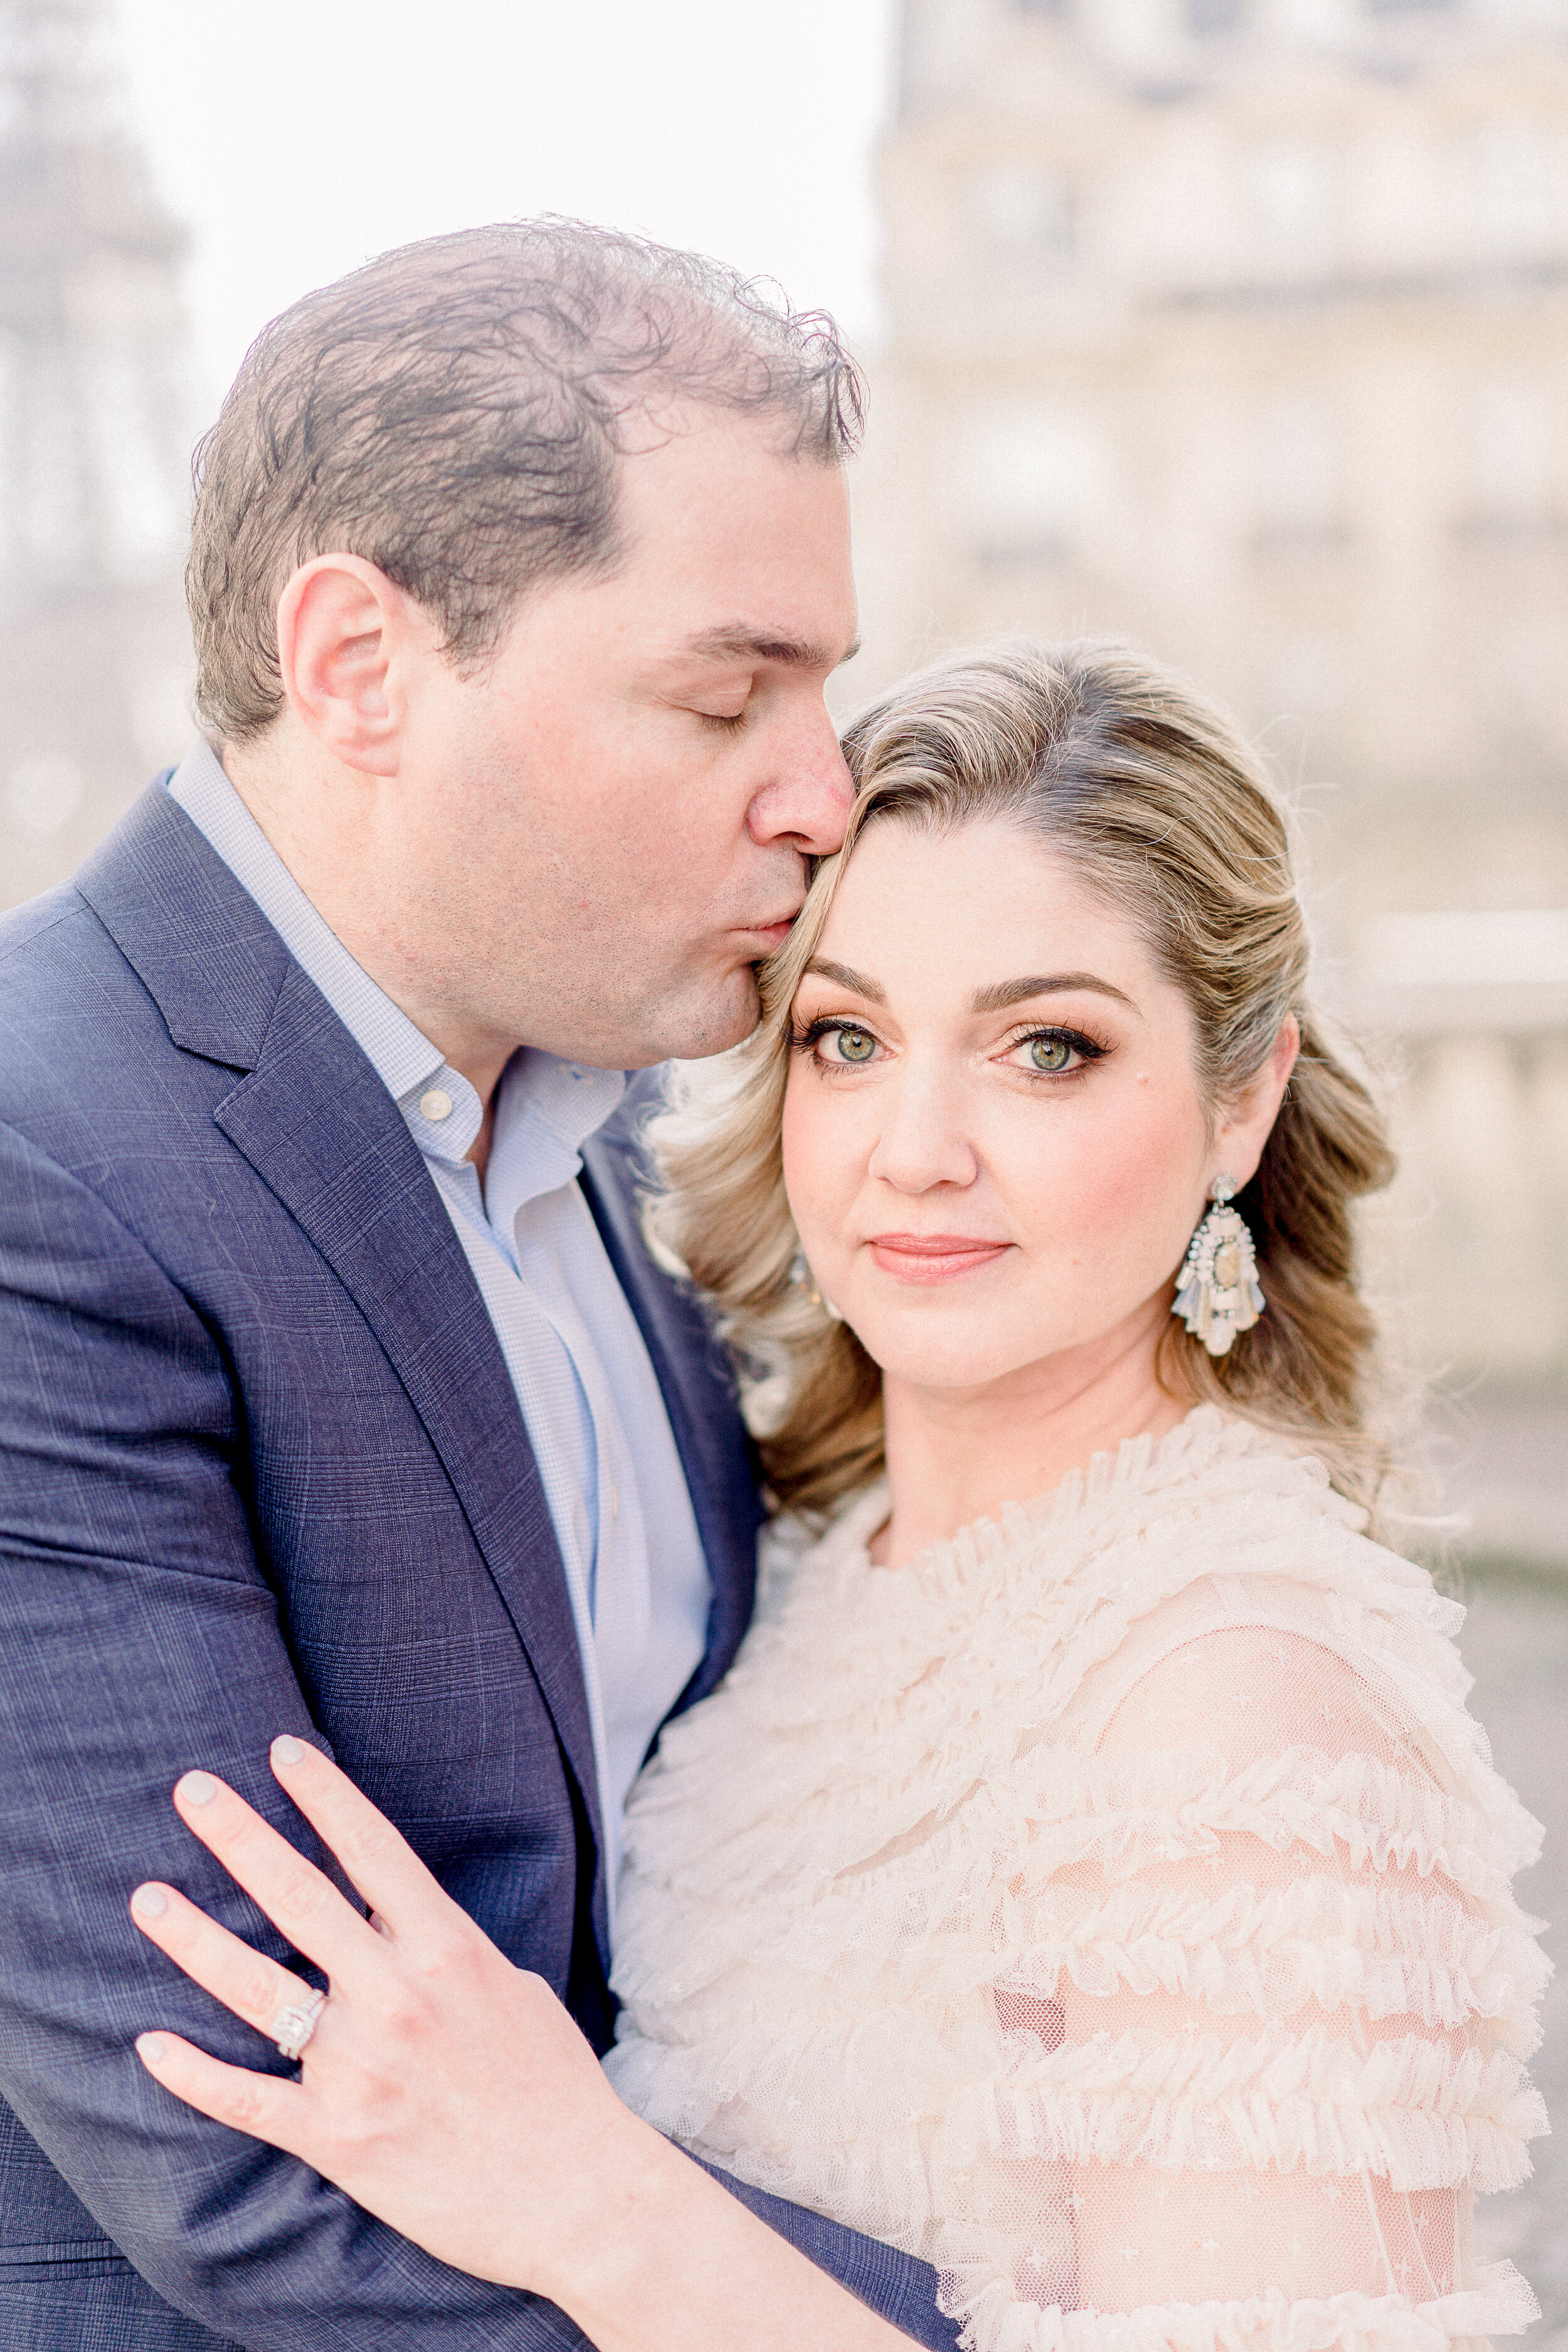 Couples Portraits for a Family Photoshoot in Paris, Hair and Makeup by Onorina Jomir beauty